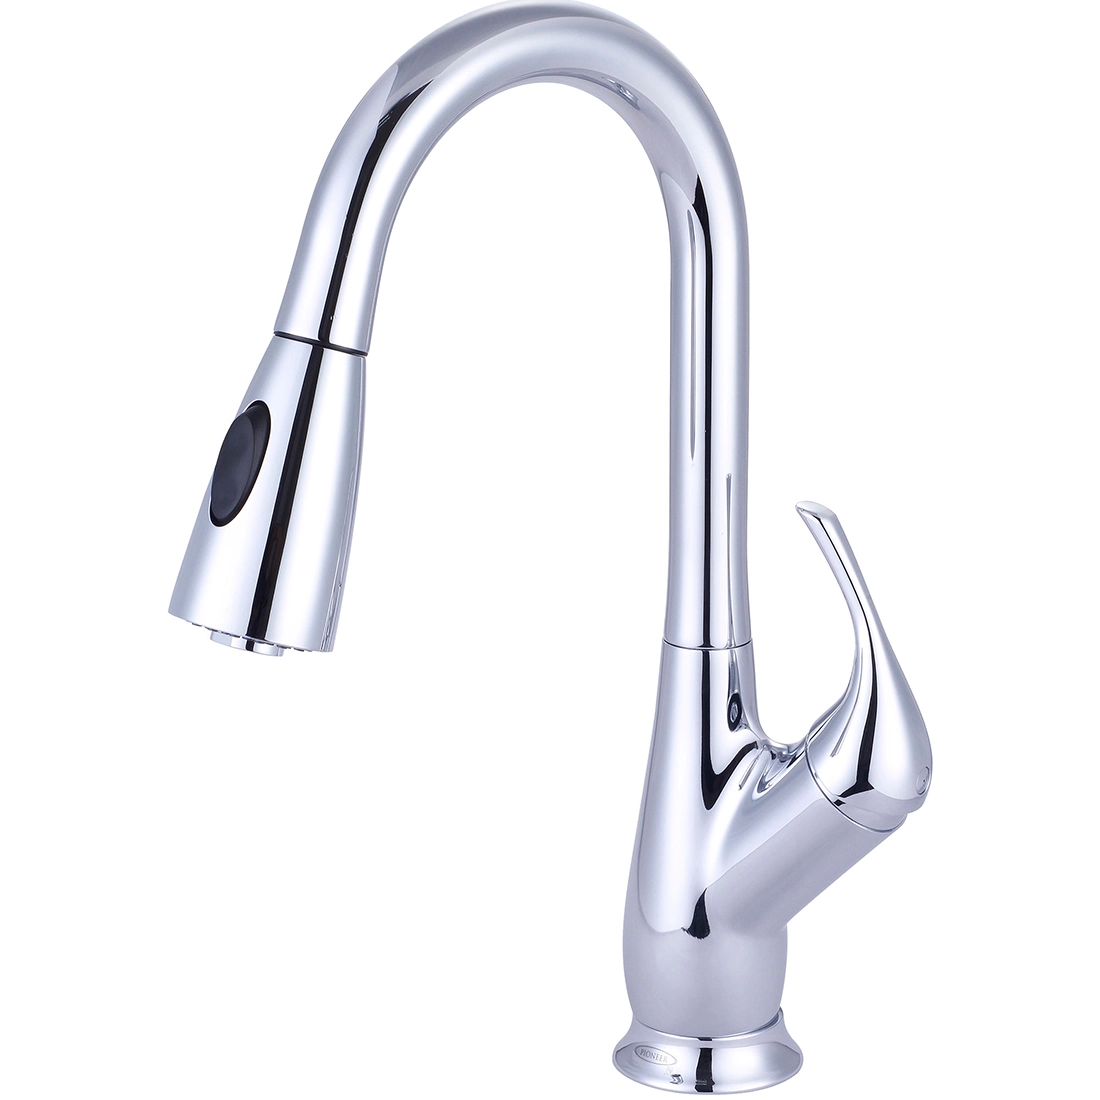 Pioneer single-handle-pull-down-kitchen-faucet Model # 2LG250